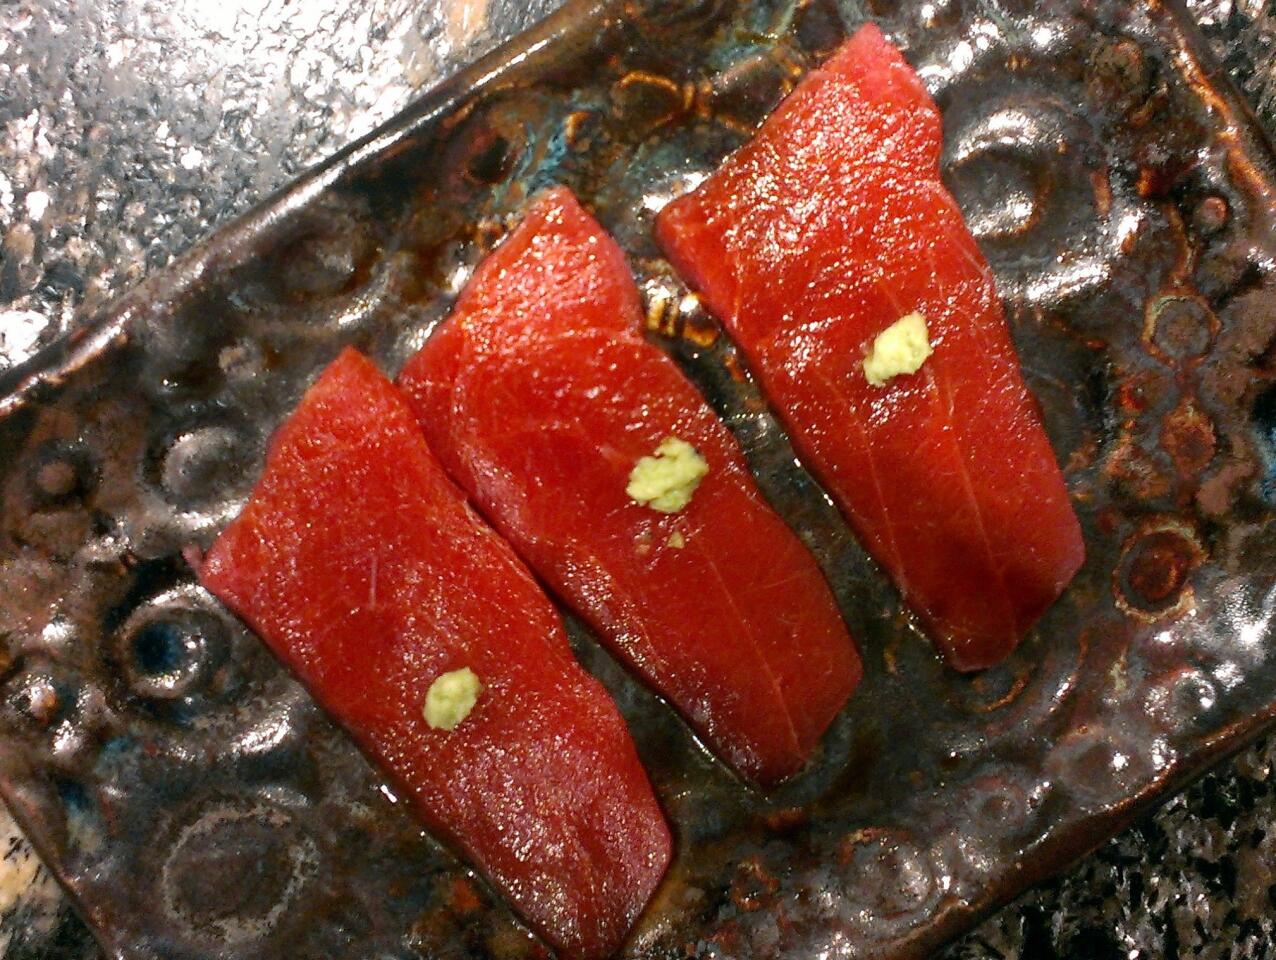 Maguro (tuna) sashimi with wasabi, part of an omakase meal at the new Sushi Zo downtown.